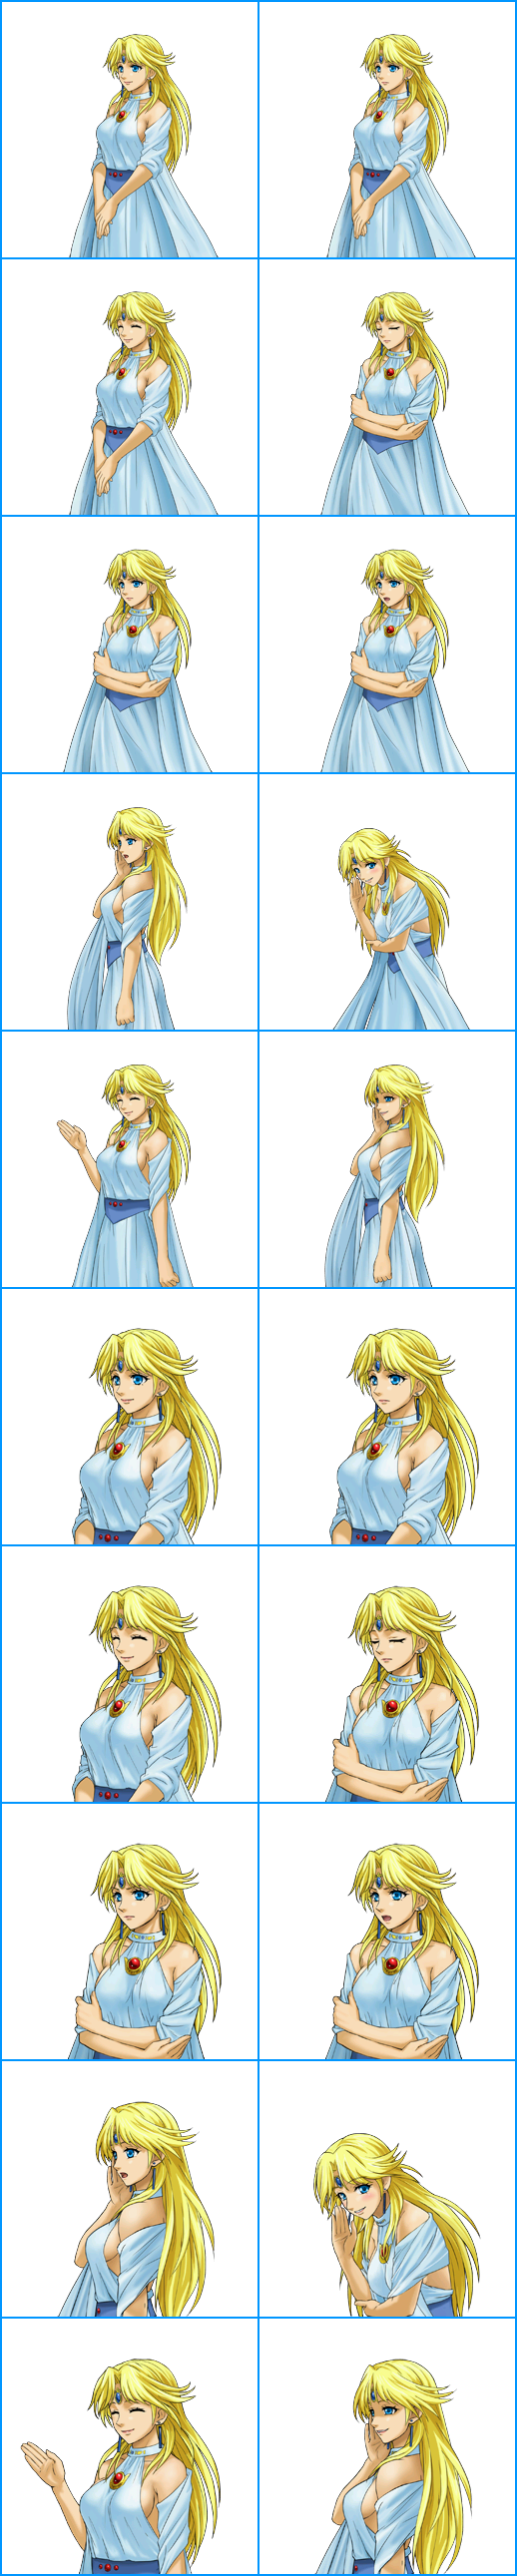 Project X Zone 2 - Sylphie